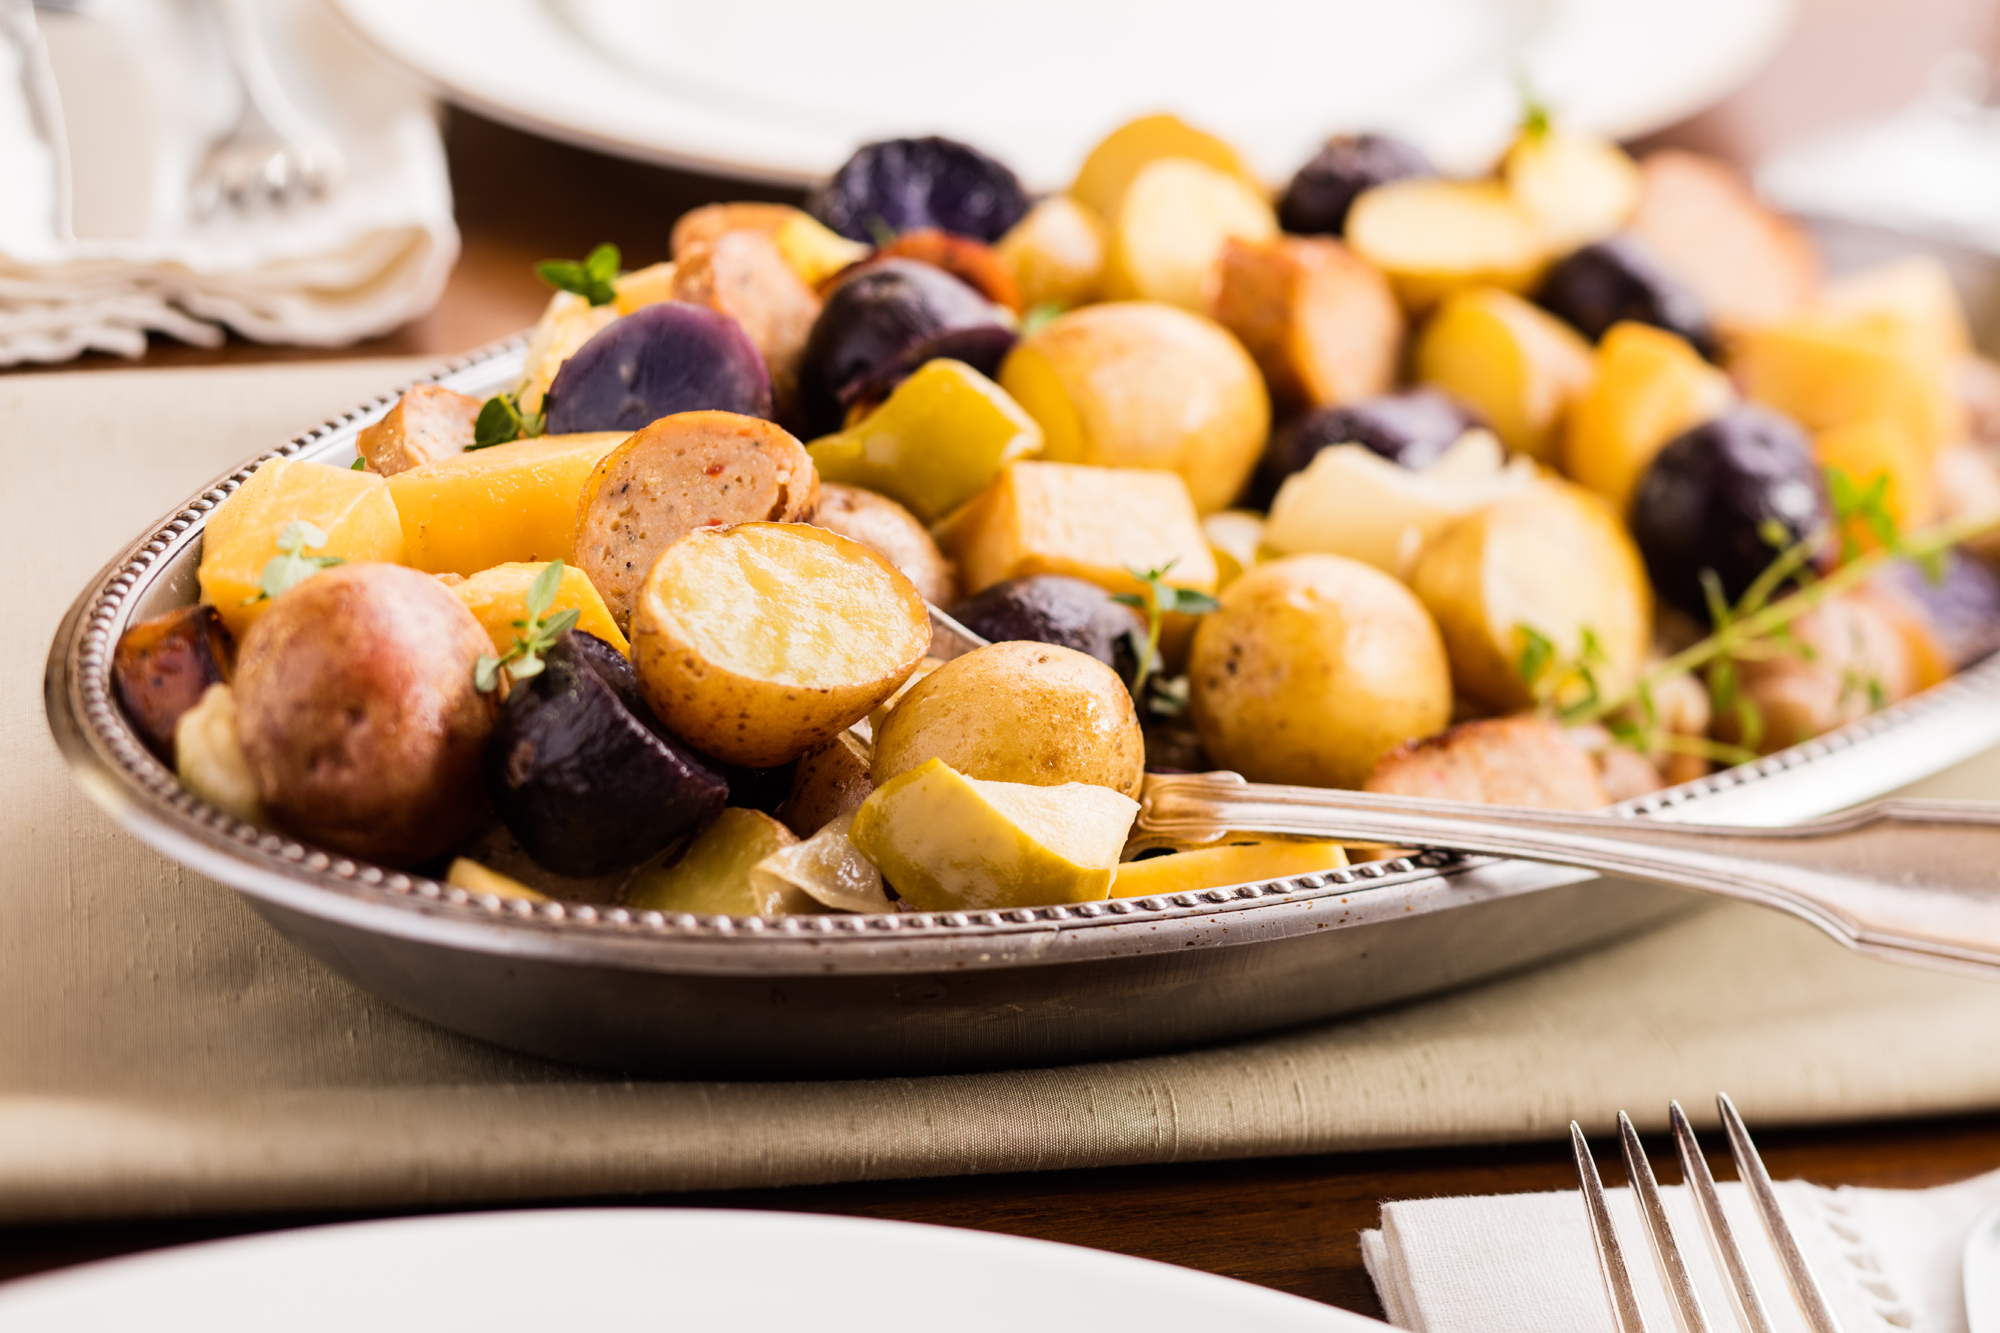 A plate of roasted veggies and sausages.